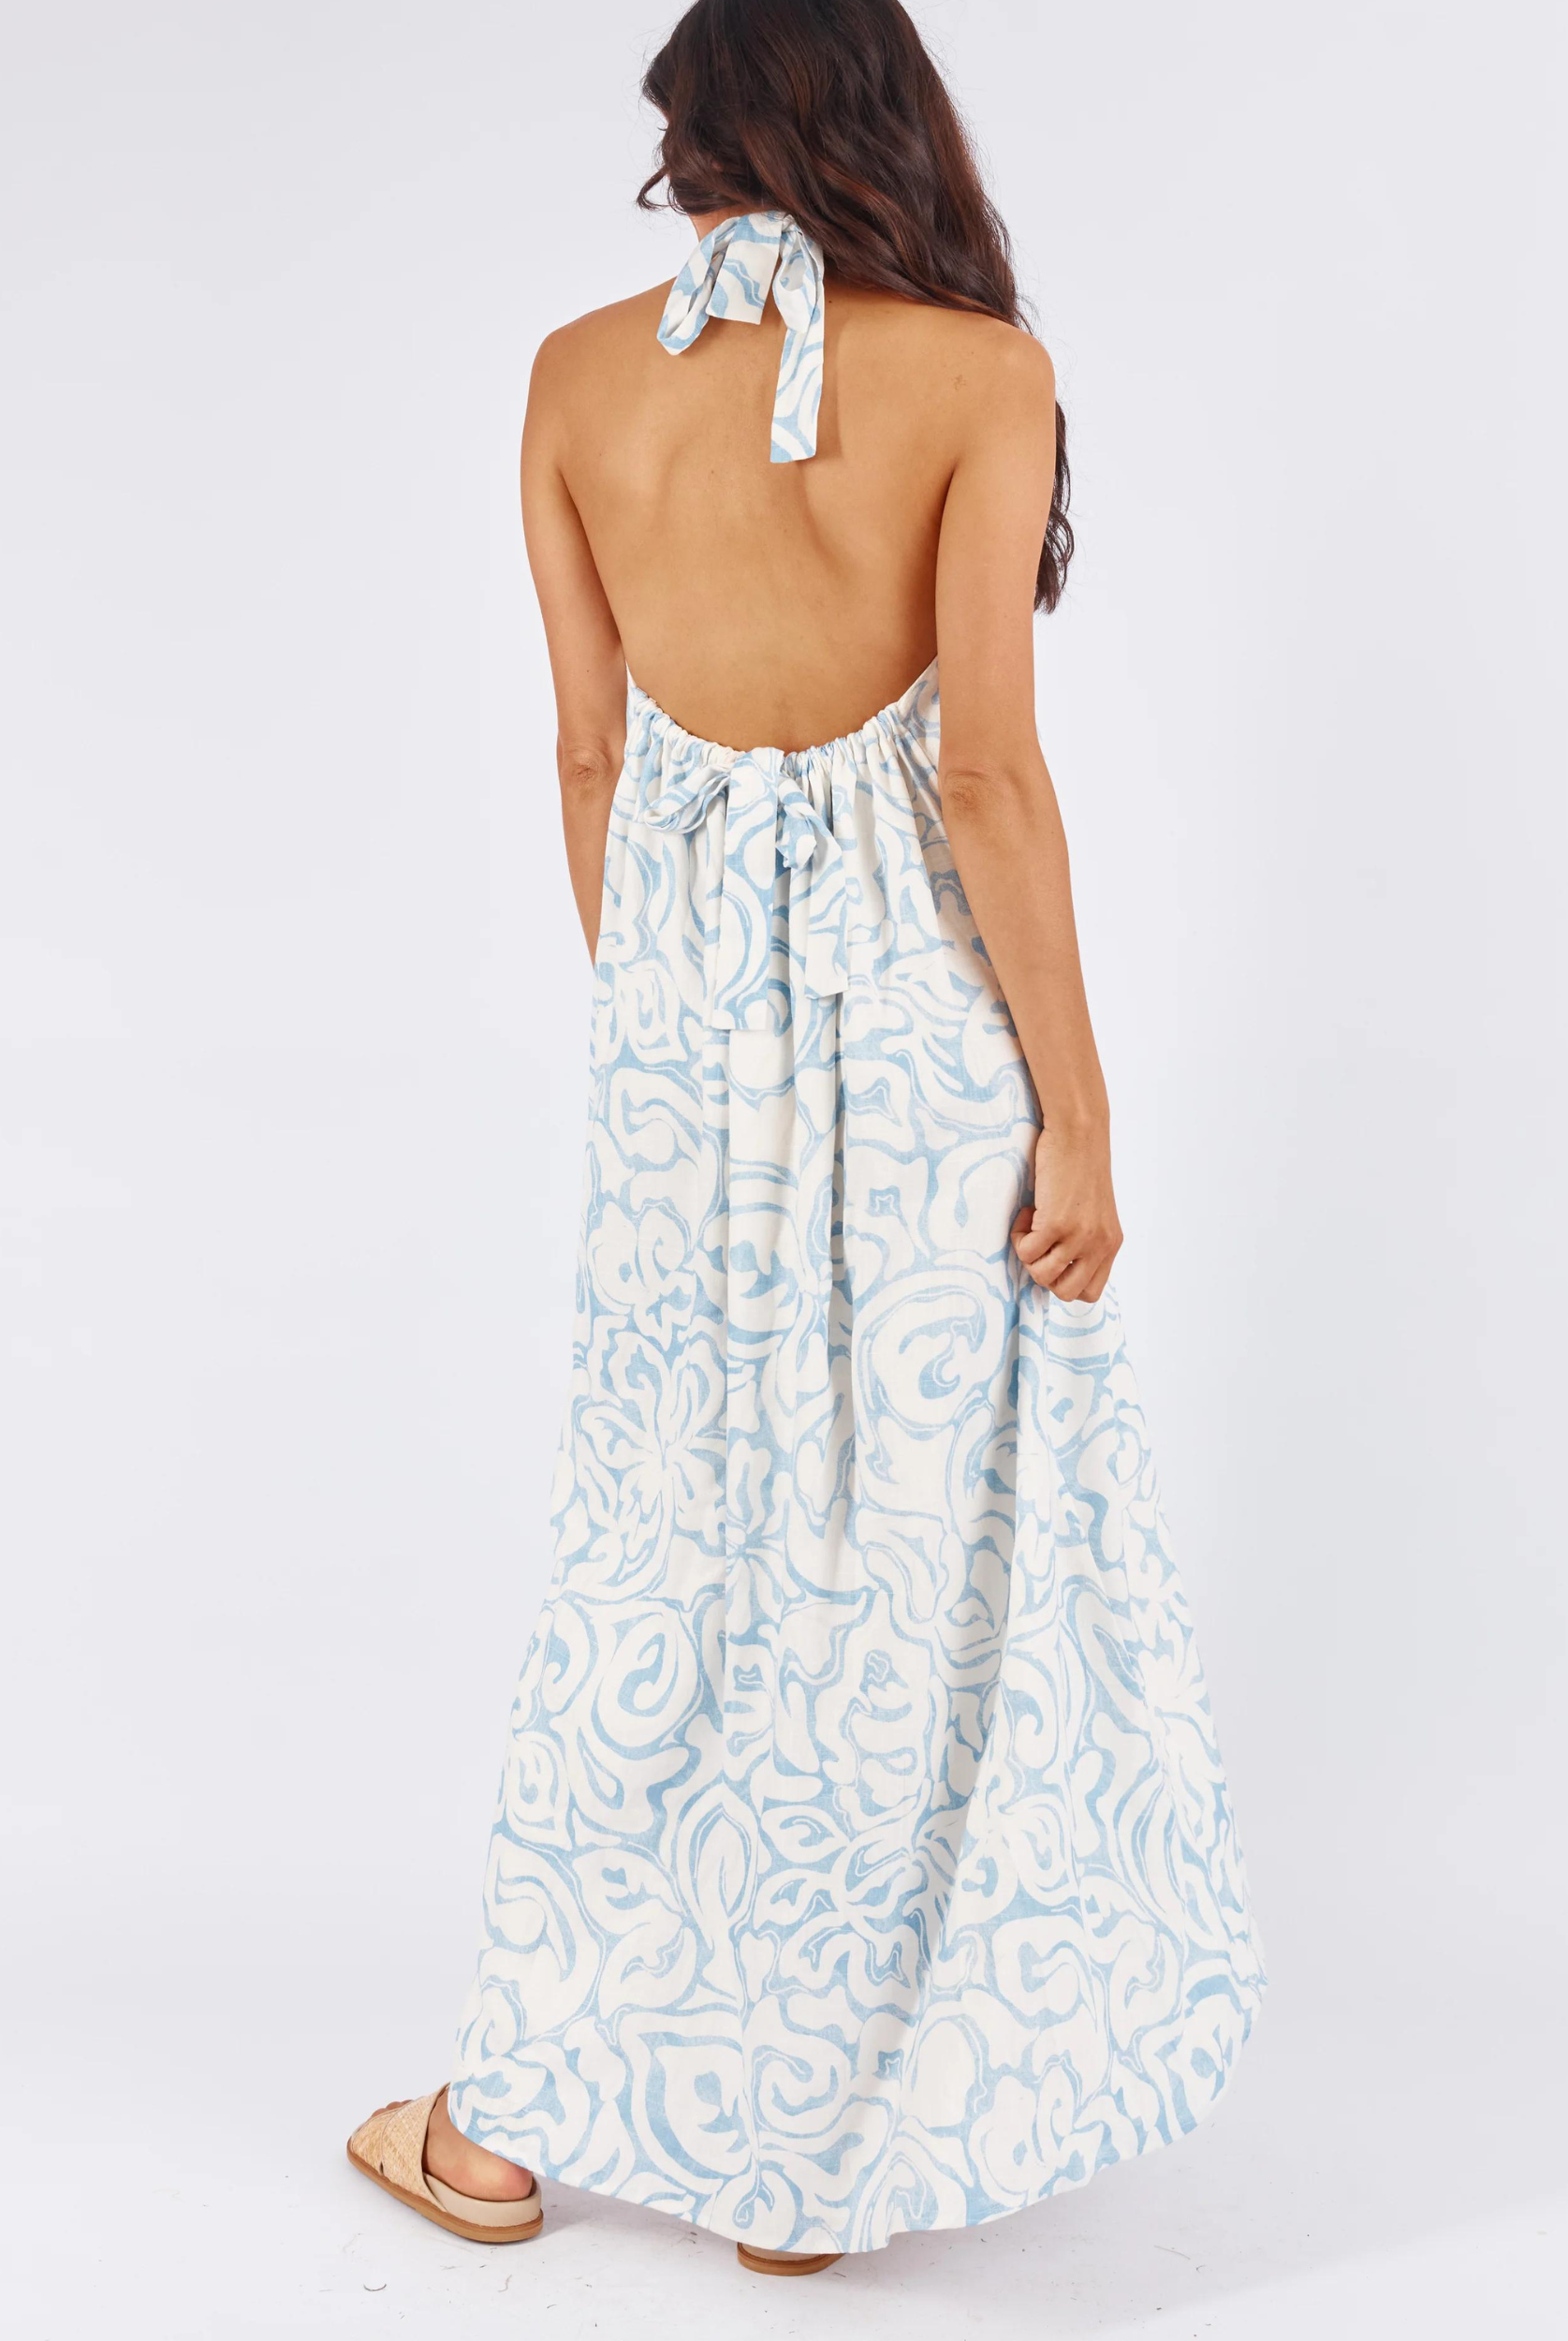 Model wearing the blue and white tamra maxi dress